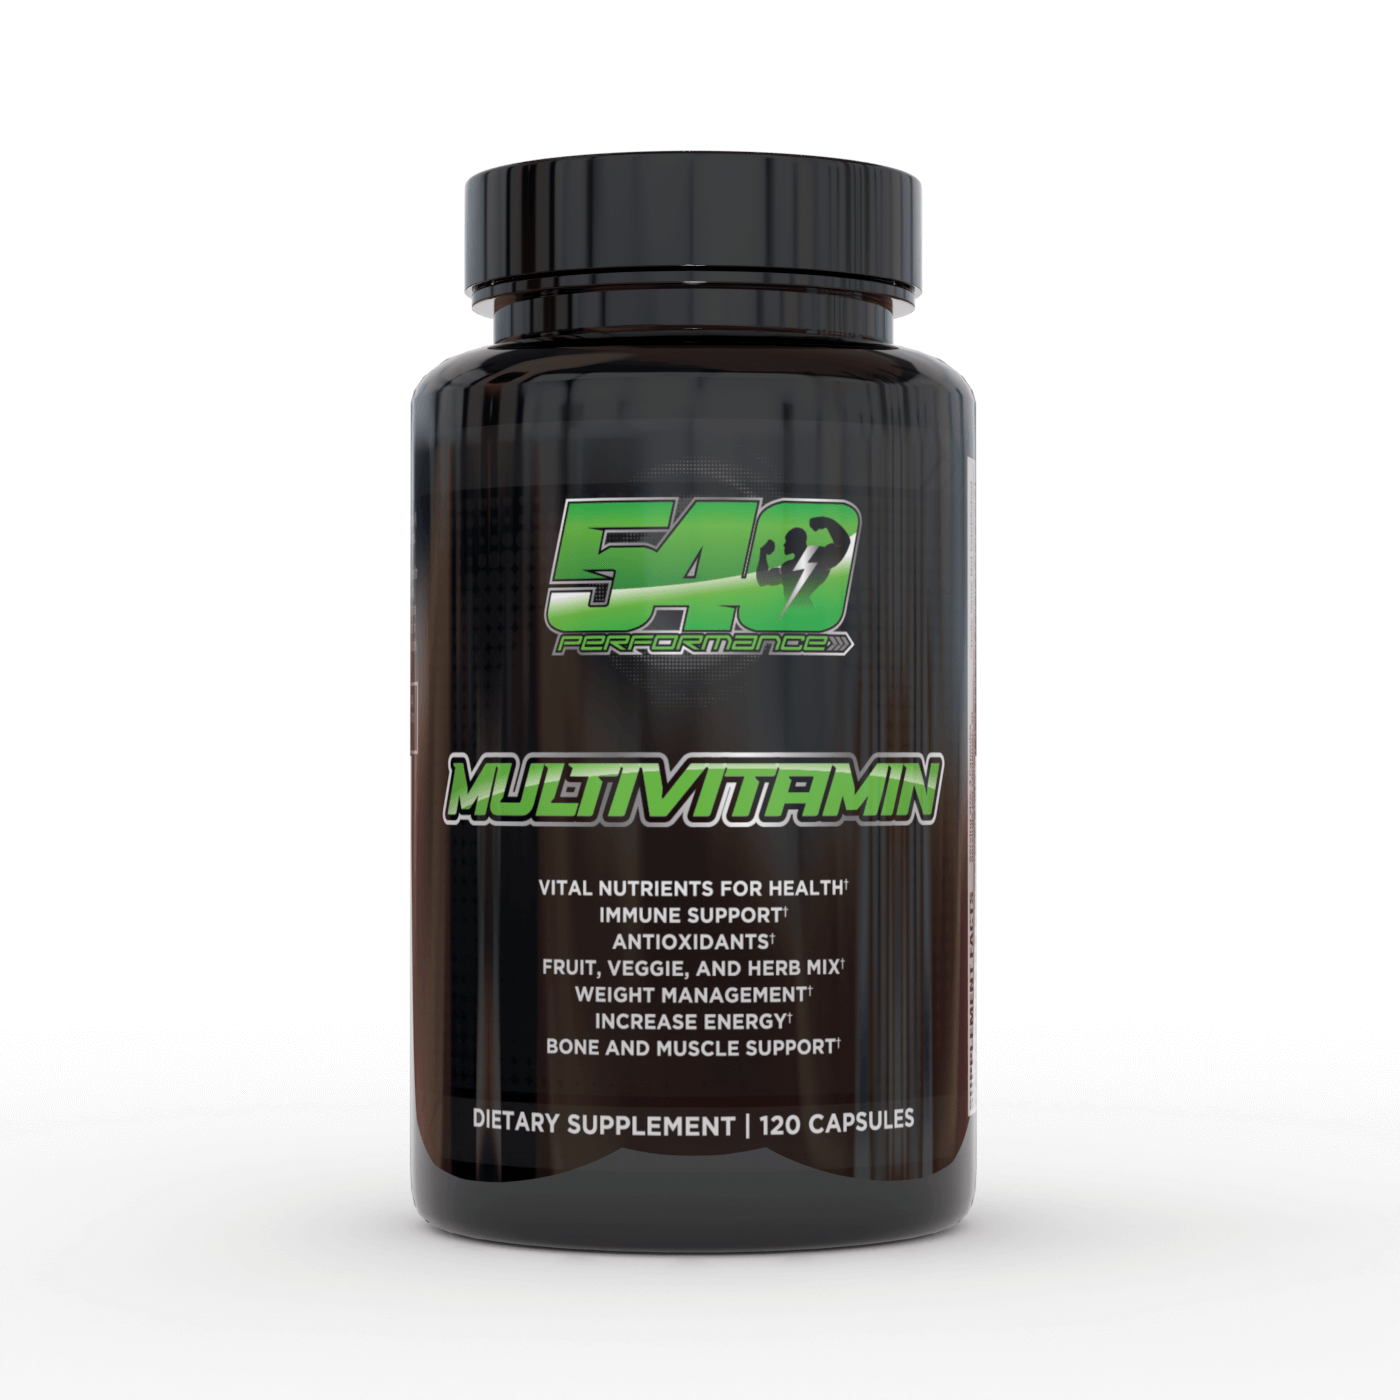 Black container with green text reading “540 Performance Multivitamin”